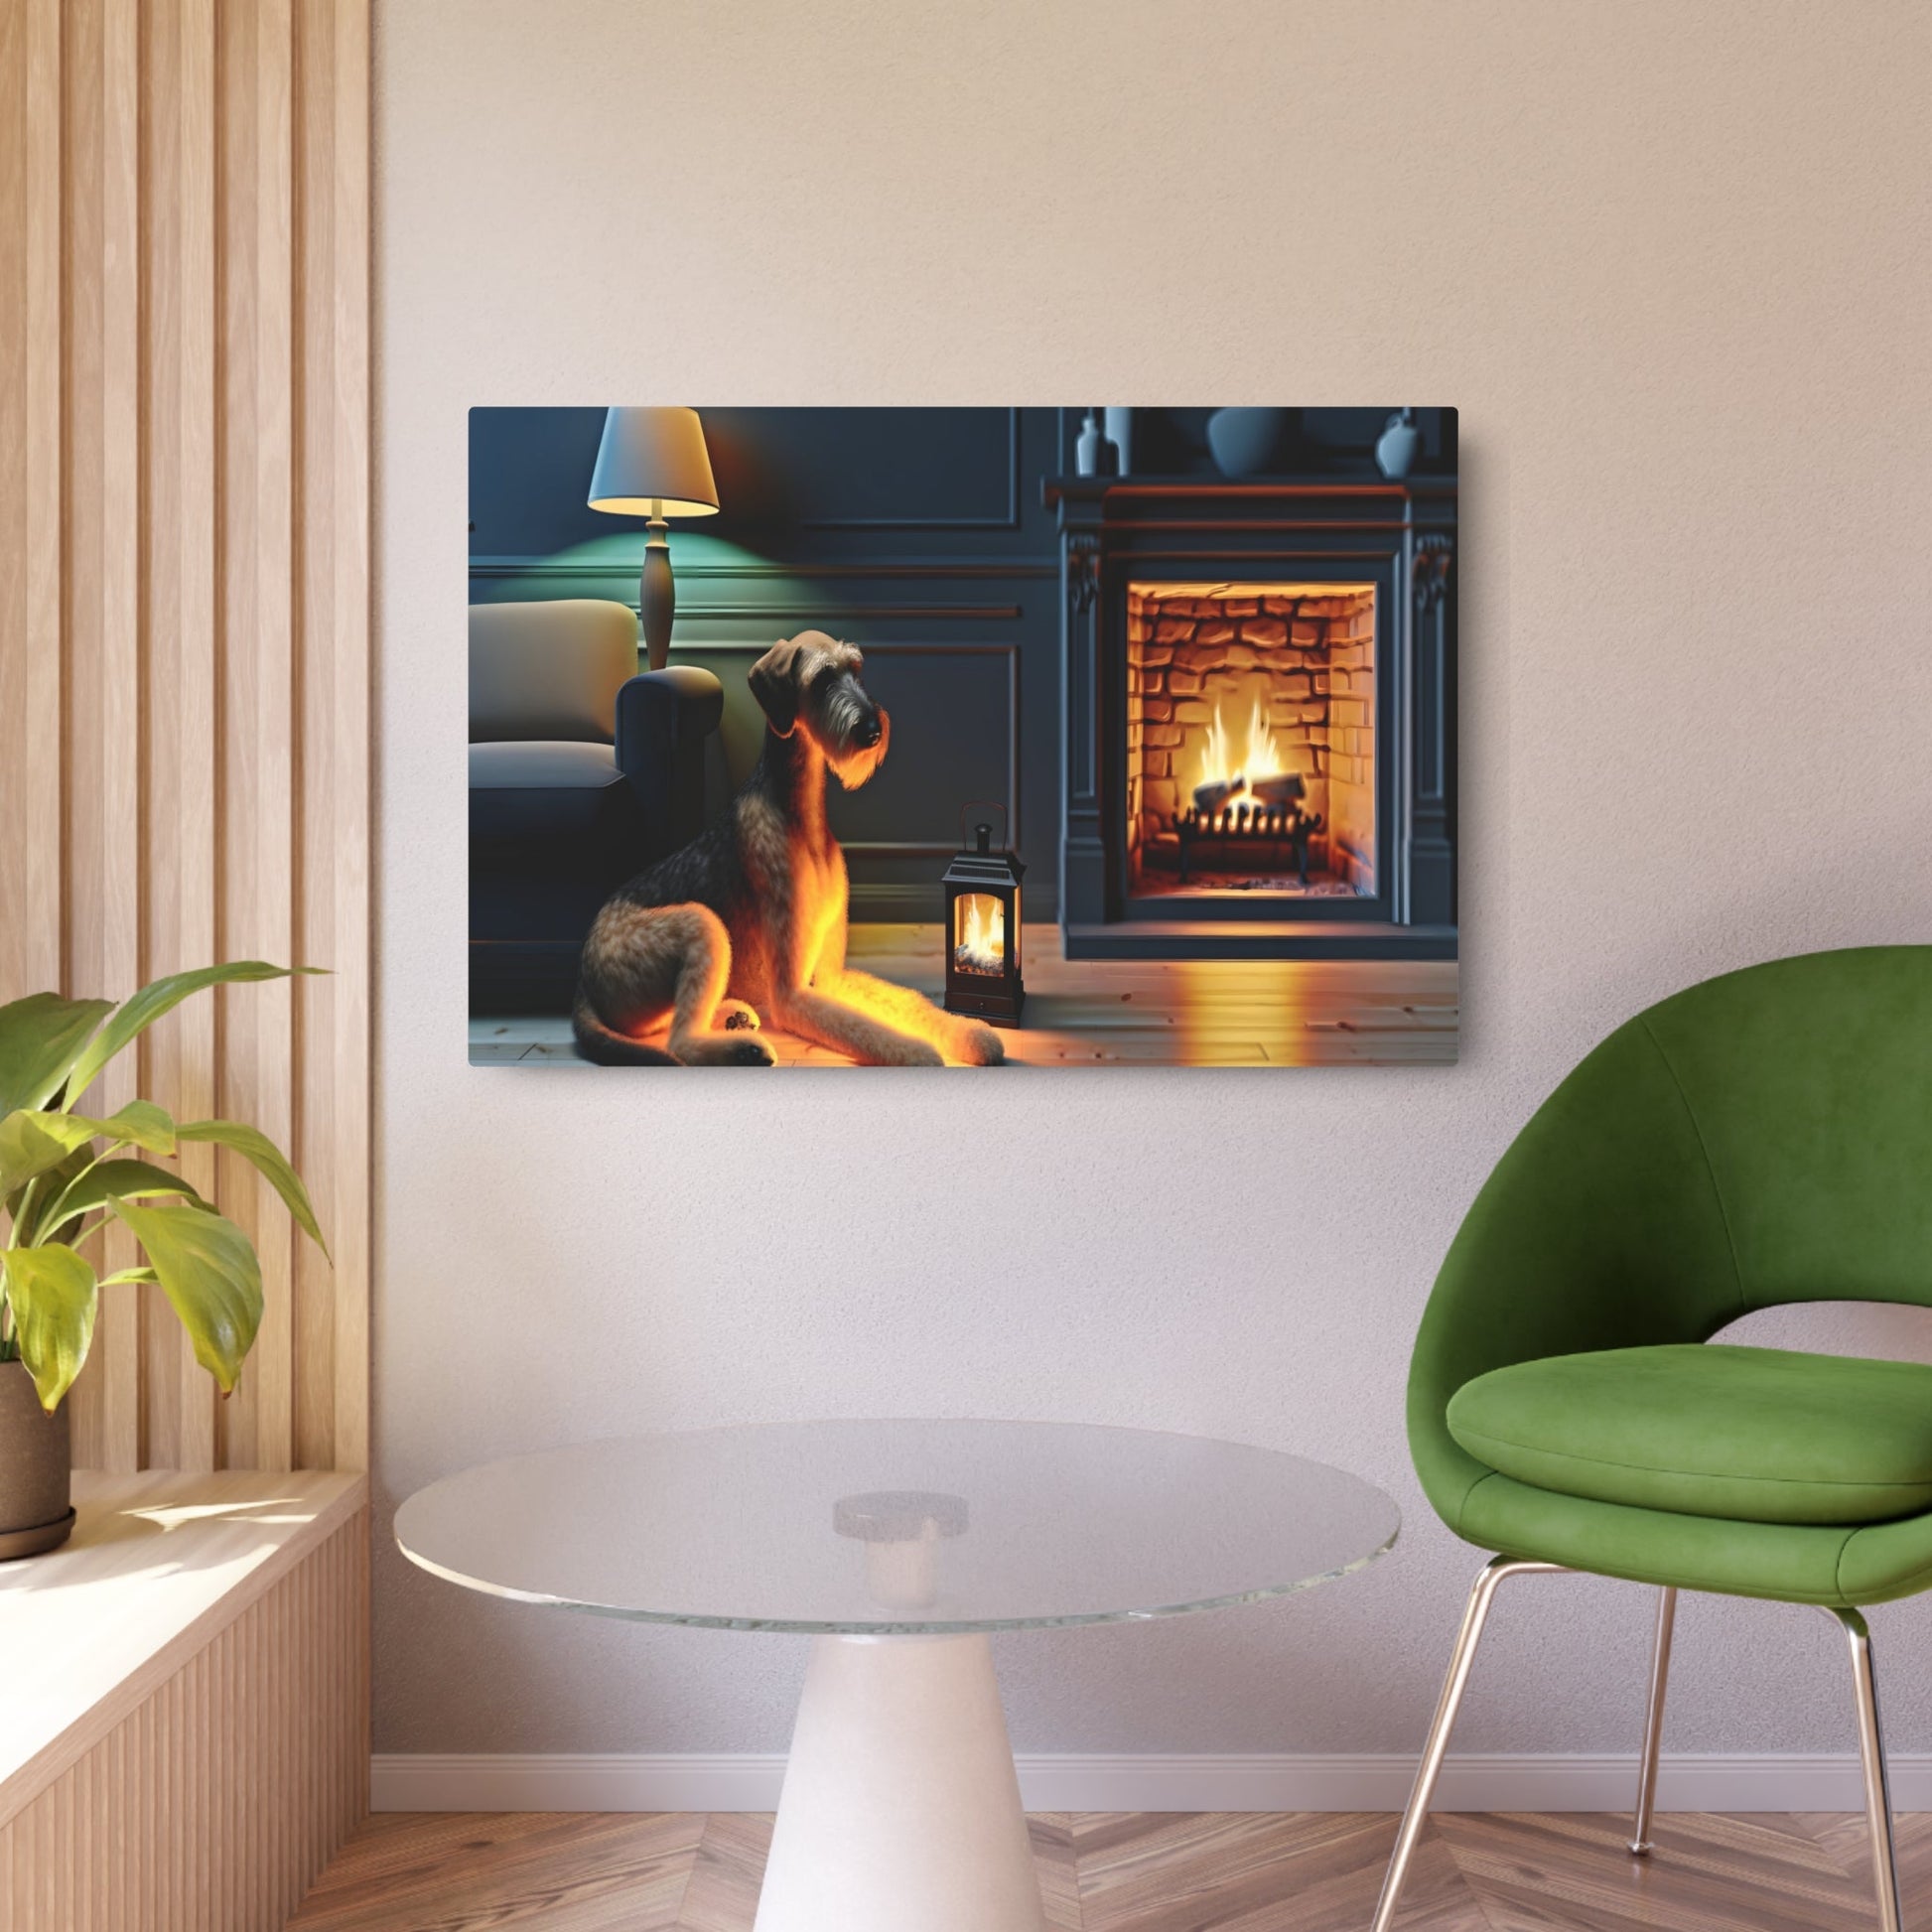 Metal Poster Art | "Realistic Western Art Style Dog by Fireplace - Detailed Realism Artwork Emphasizing Texture and Lighting" - Metal Poster Art 36″ x 24″ (Horizontal) 0.12''